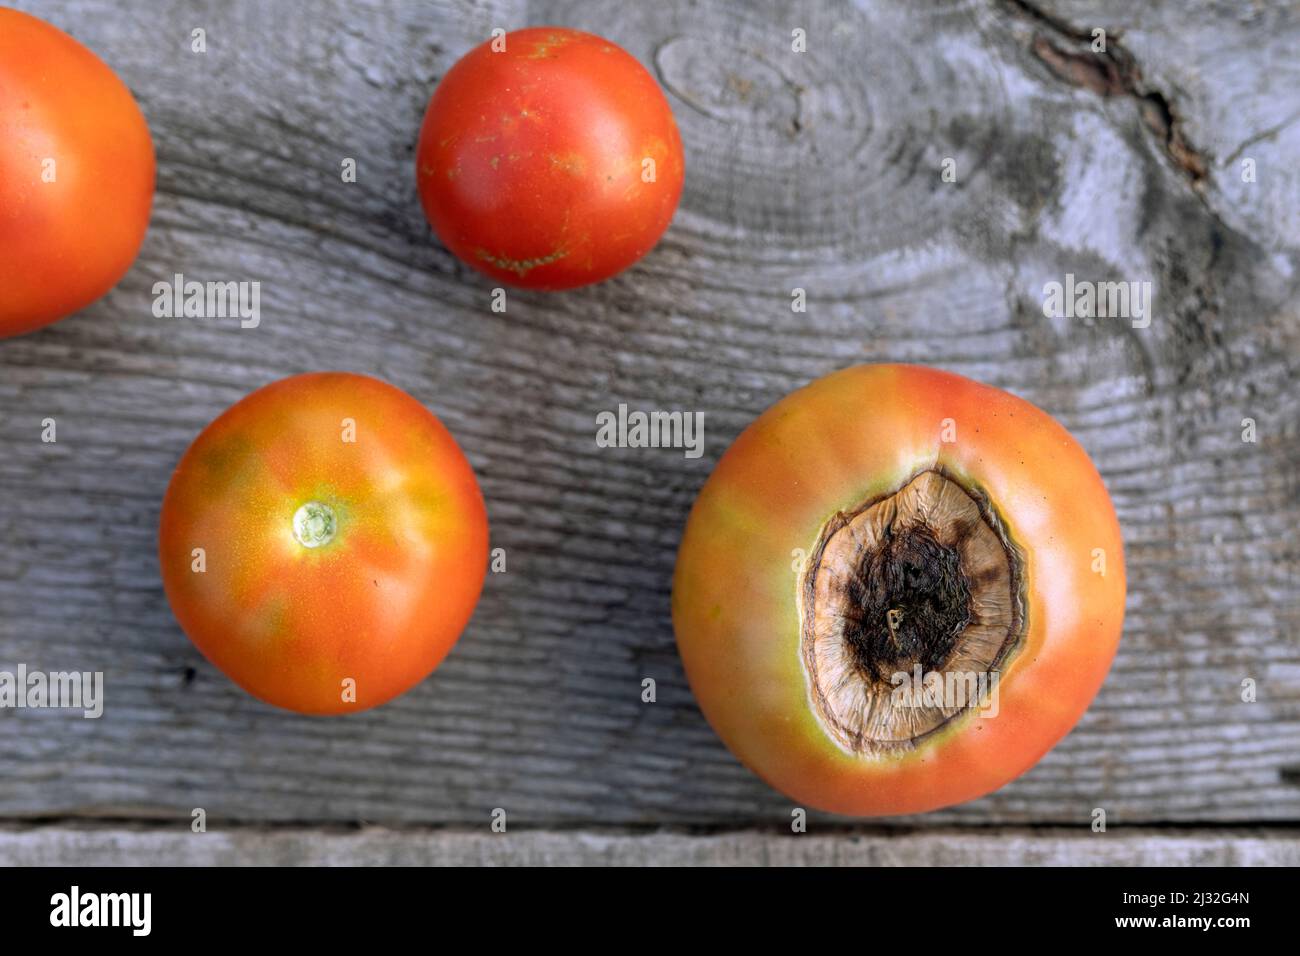 Sick tomato fruit affected by vertex rot disease near ripe red tomatoes Stock Photo